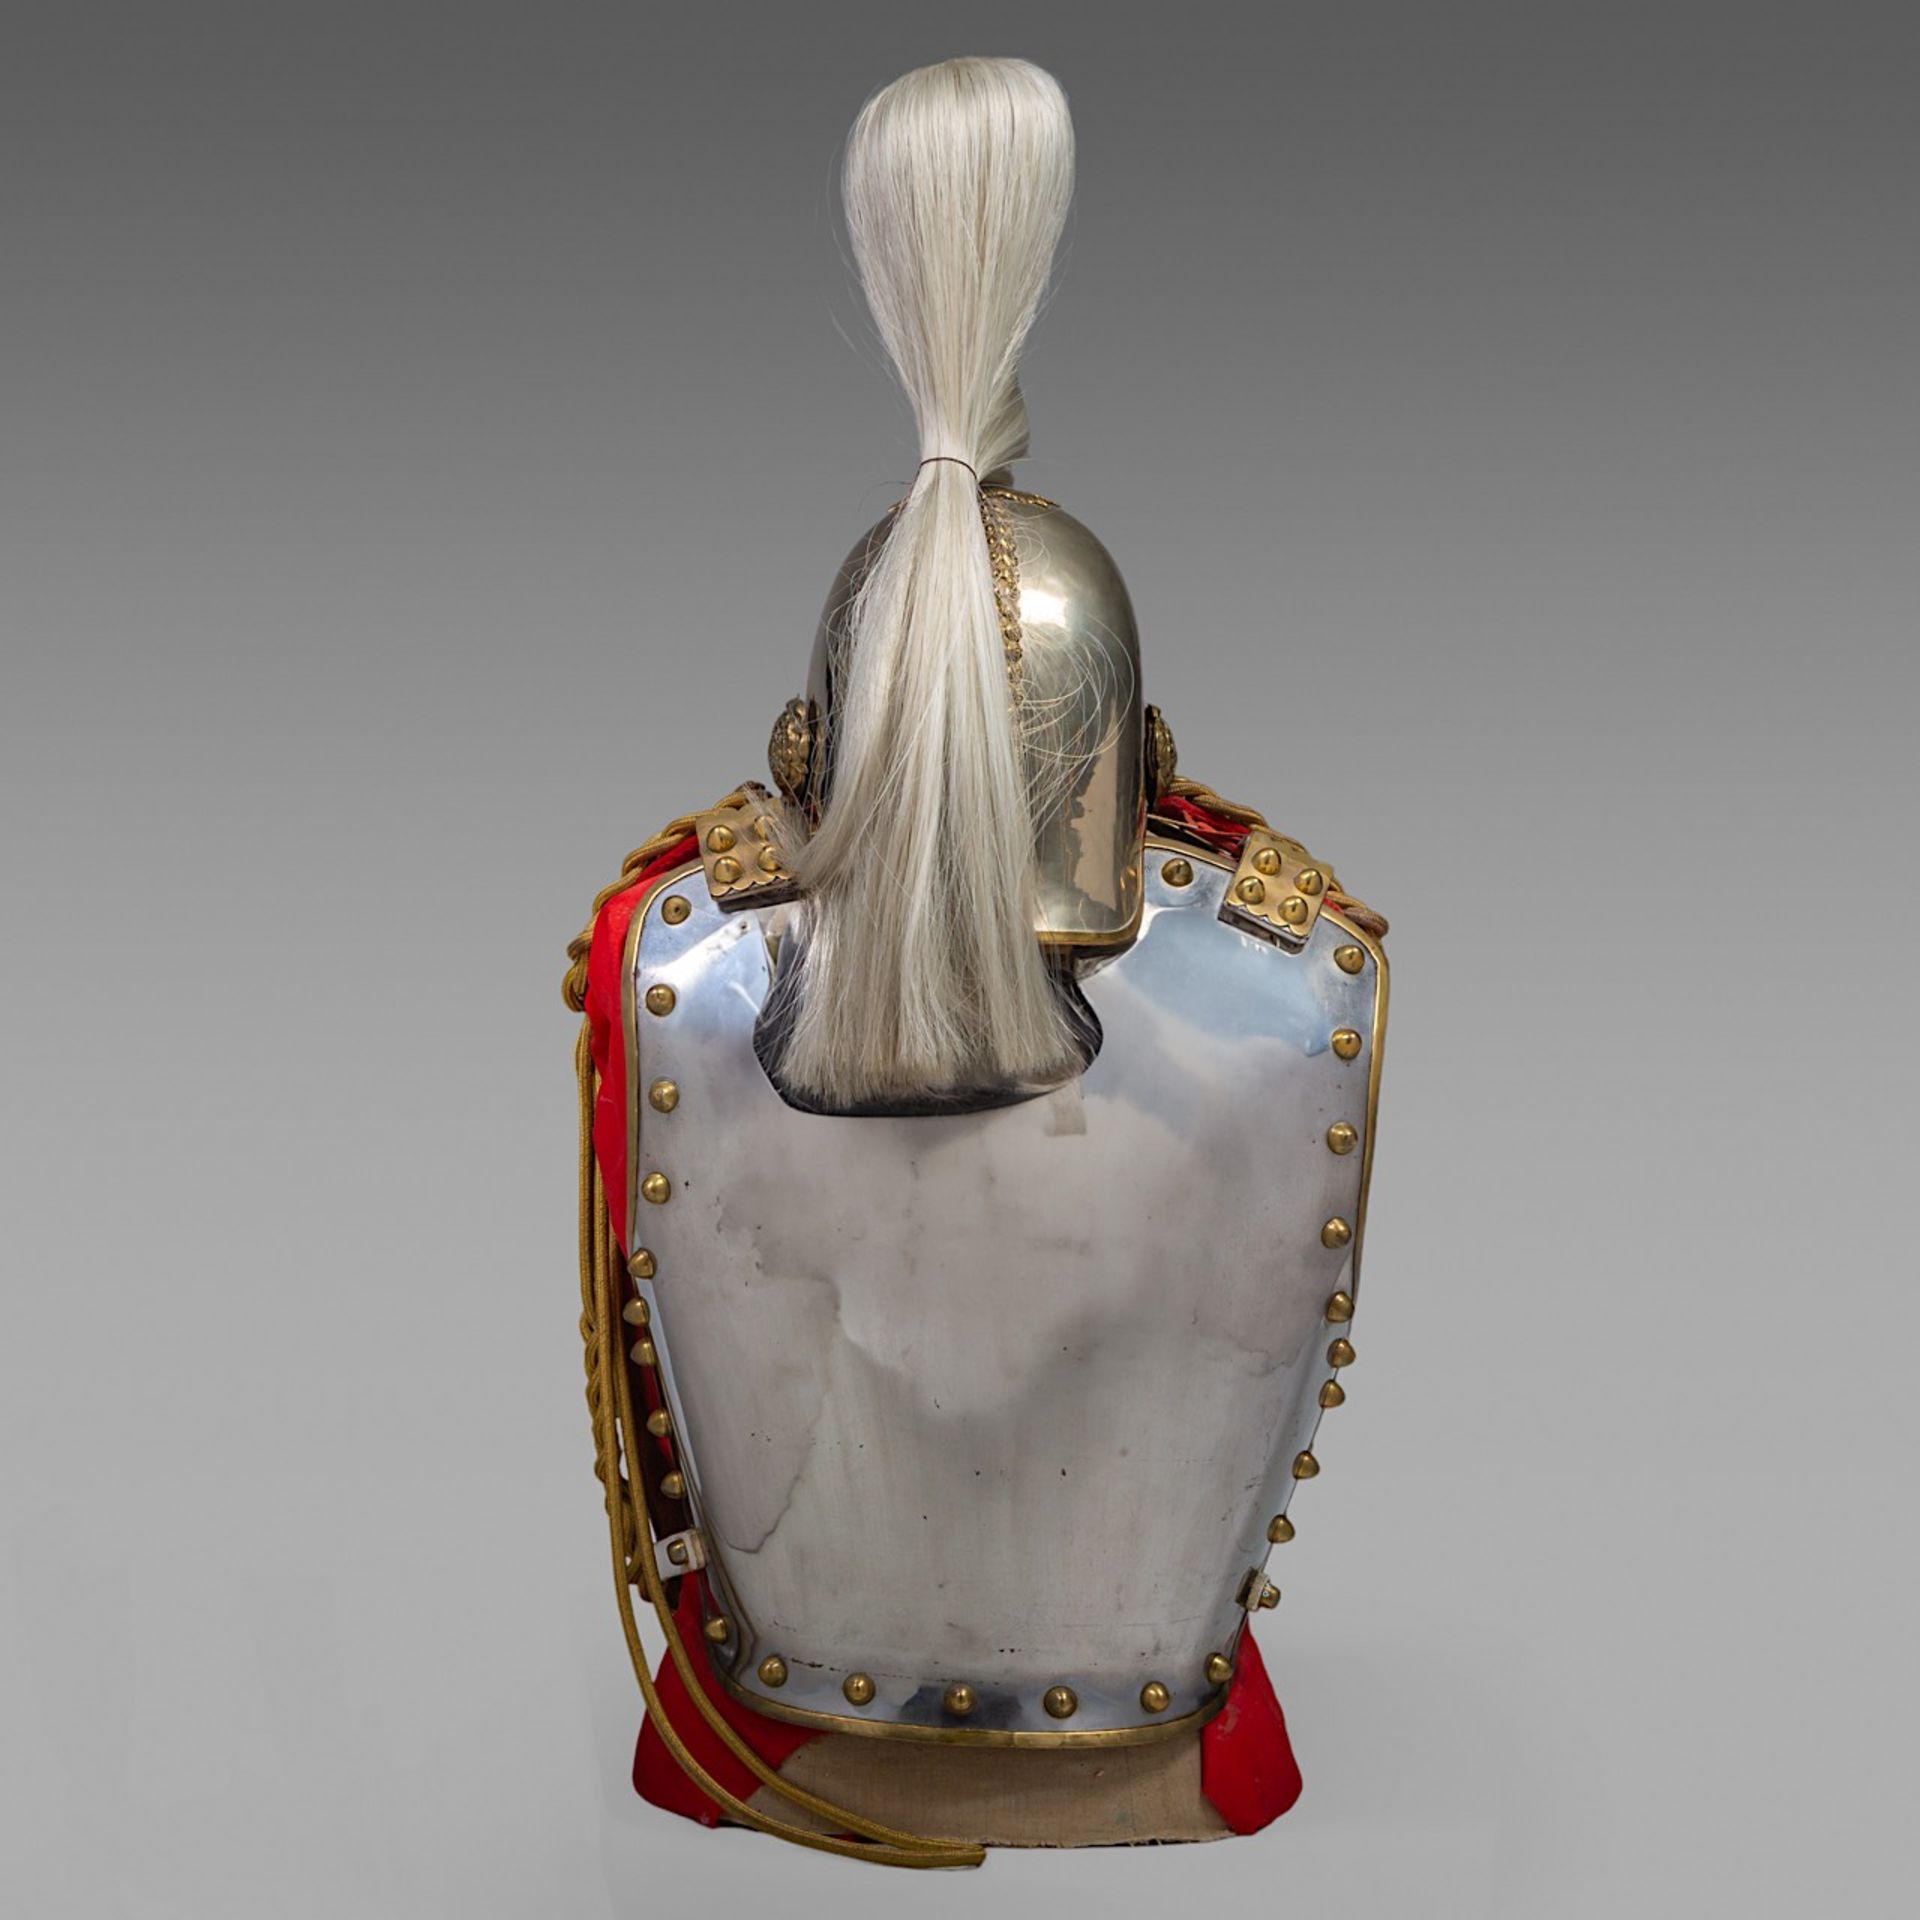 cuirass and helmet of the Royal Horse guards, metal and brass,1952 (Eliabeth II) 88 x 36 x 44 cm. (3 - Bild 4 aus 6